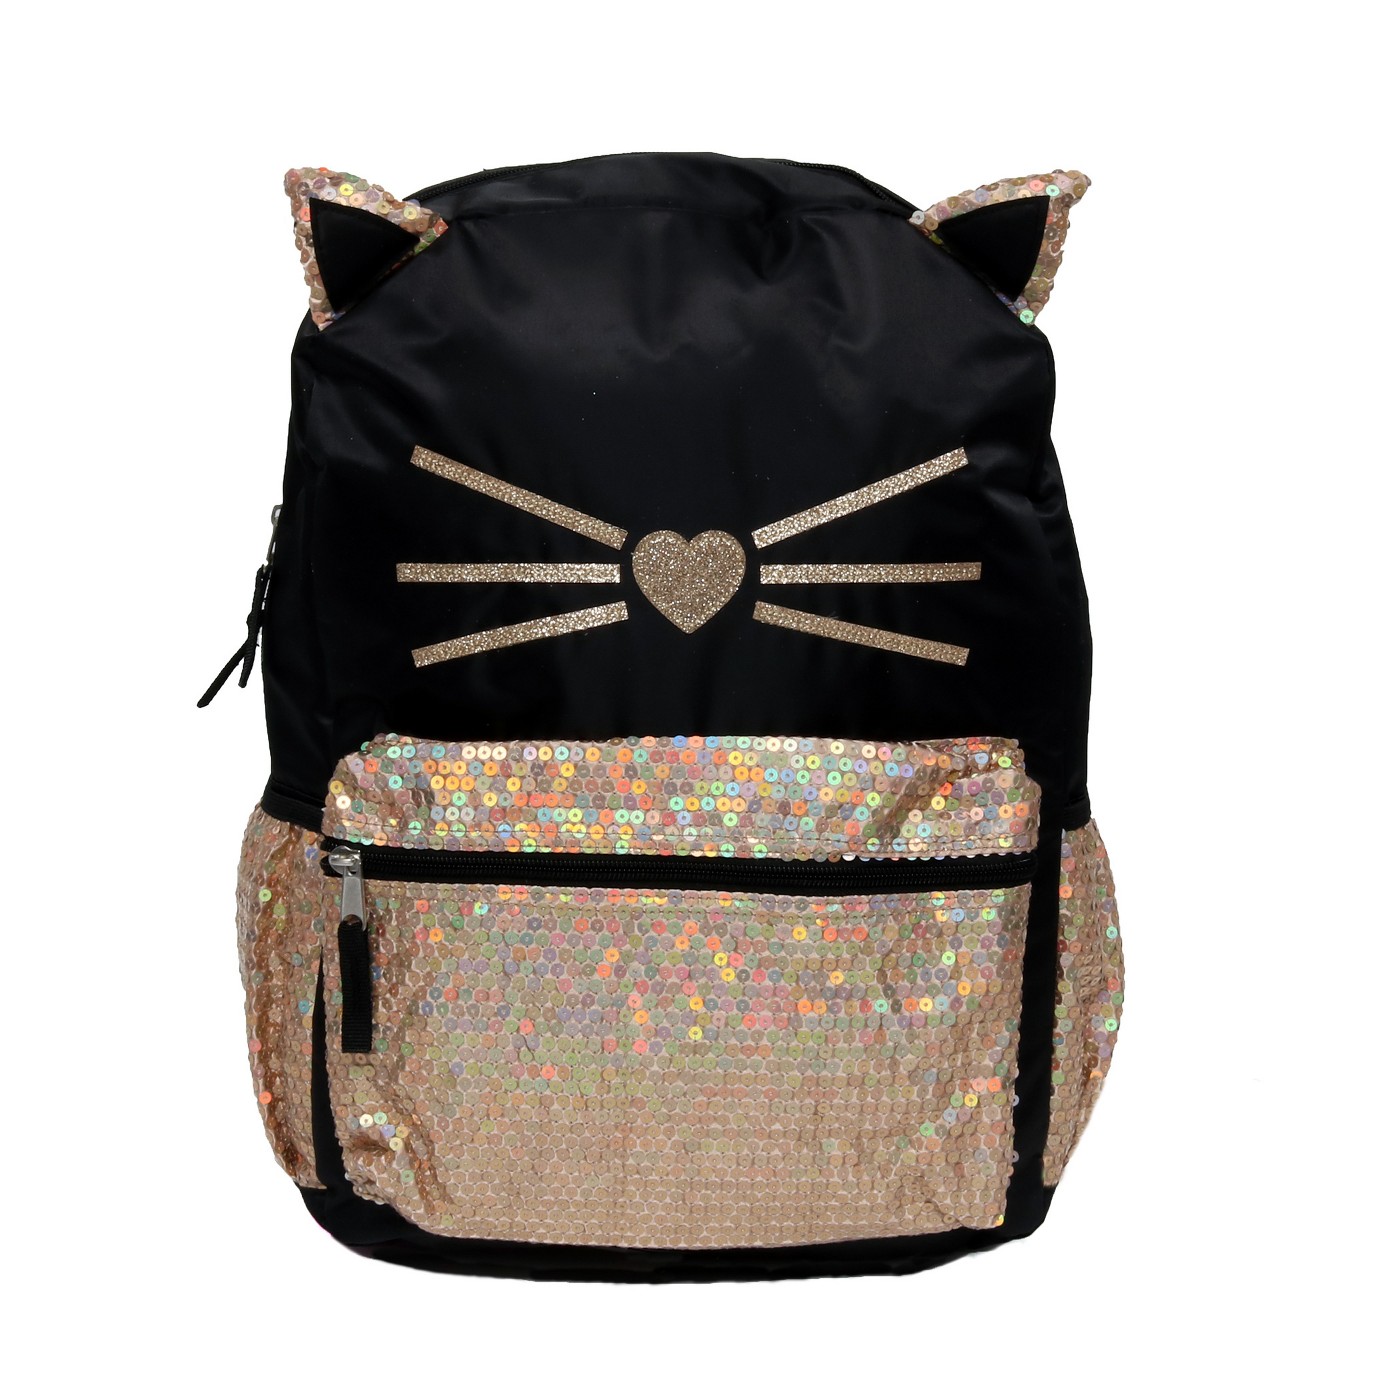 These cool backpacks for kids are sure to make yours smile! 